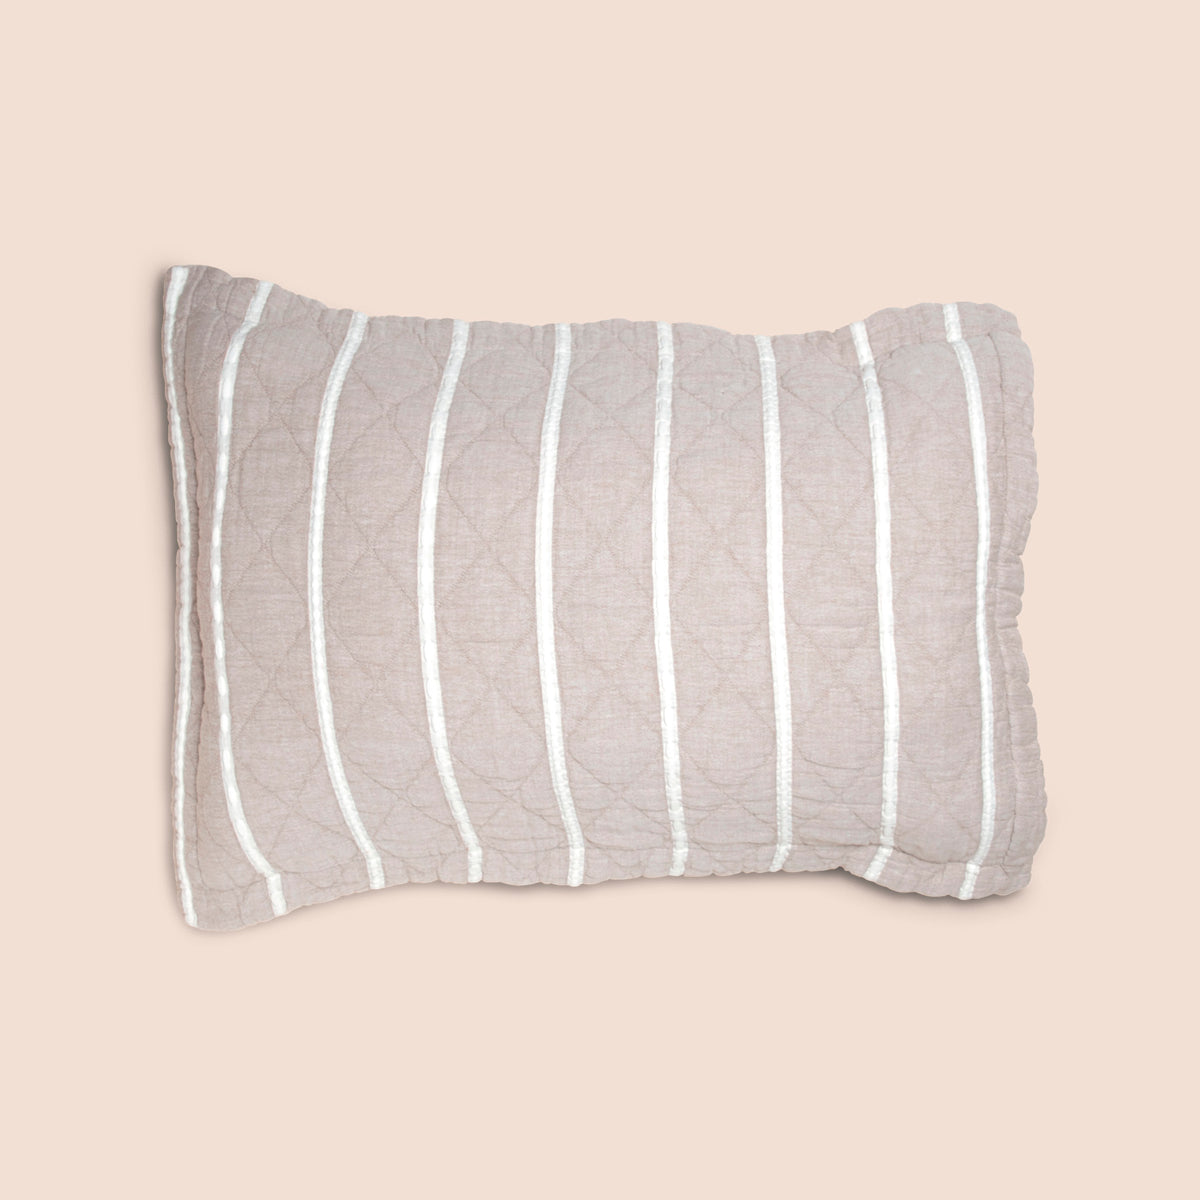 Image of the gray and white side of the Heritage Pillow Sham on a pillow with a light pink background